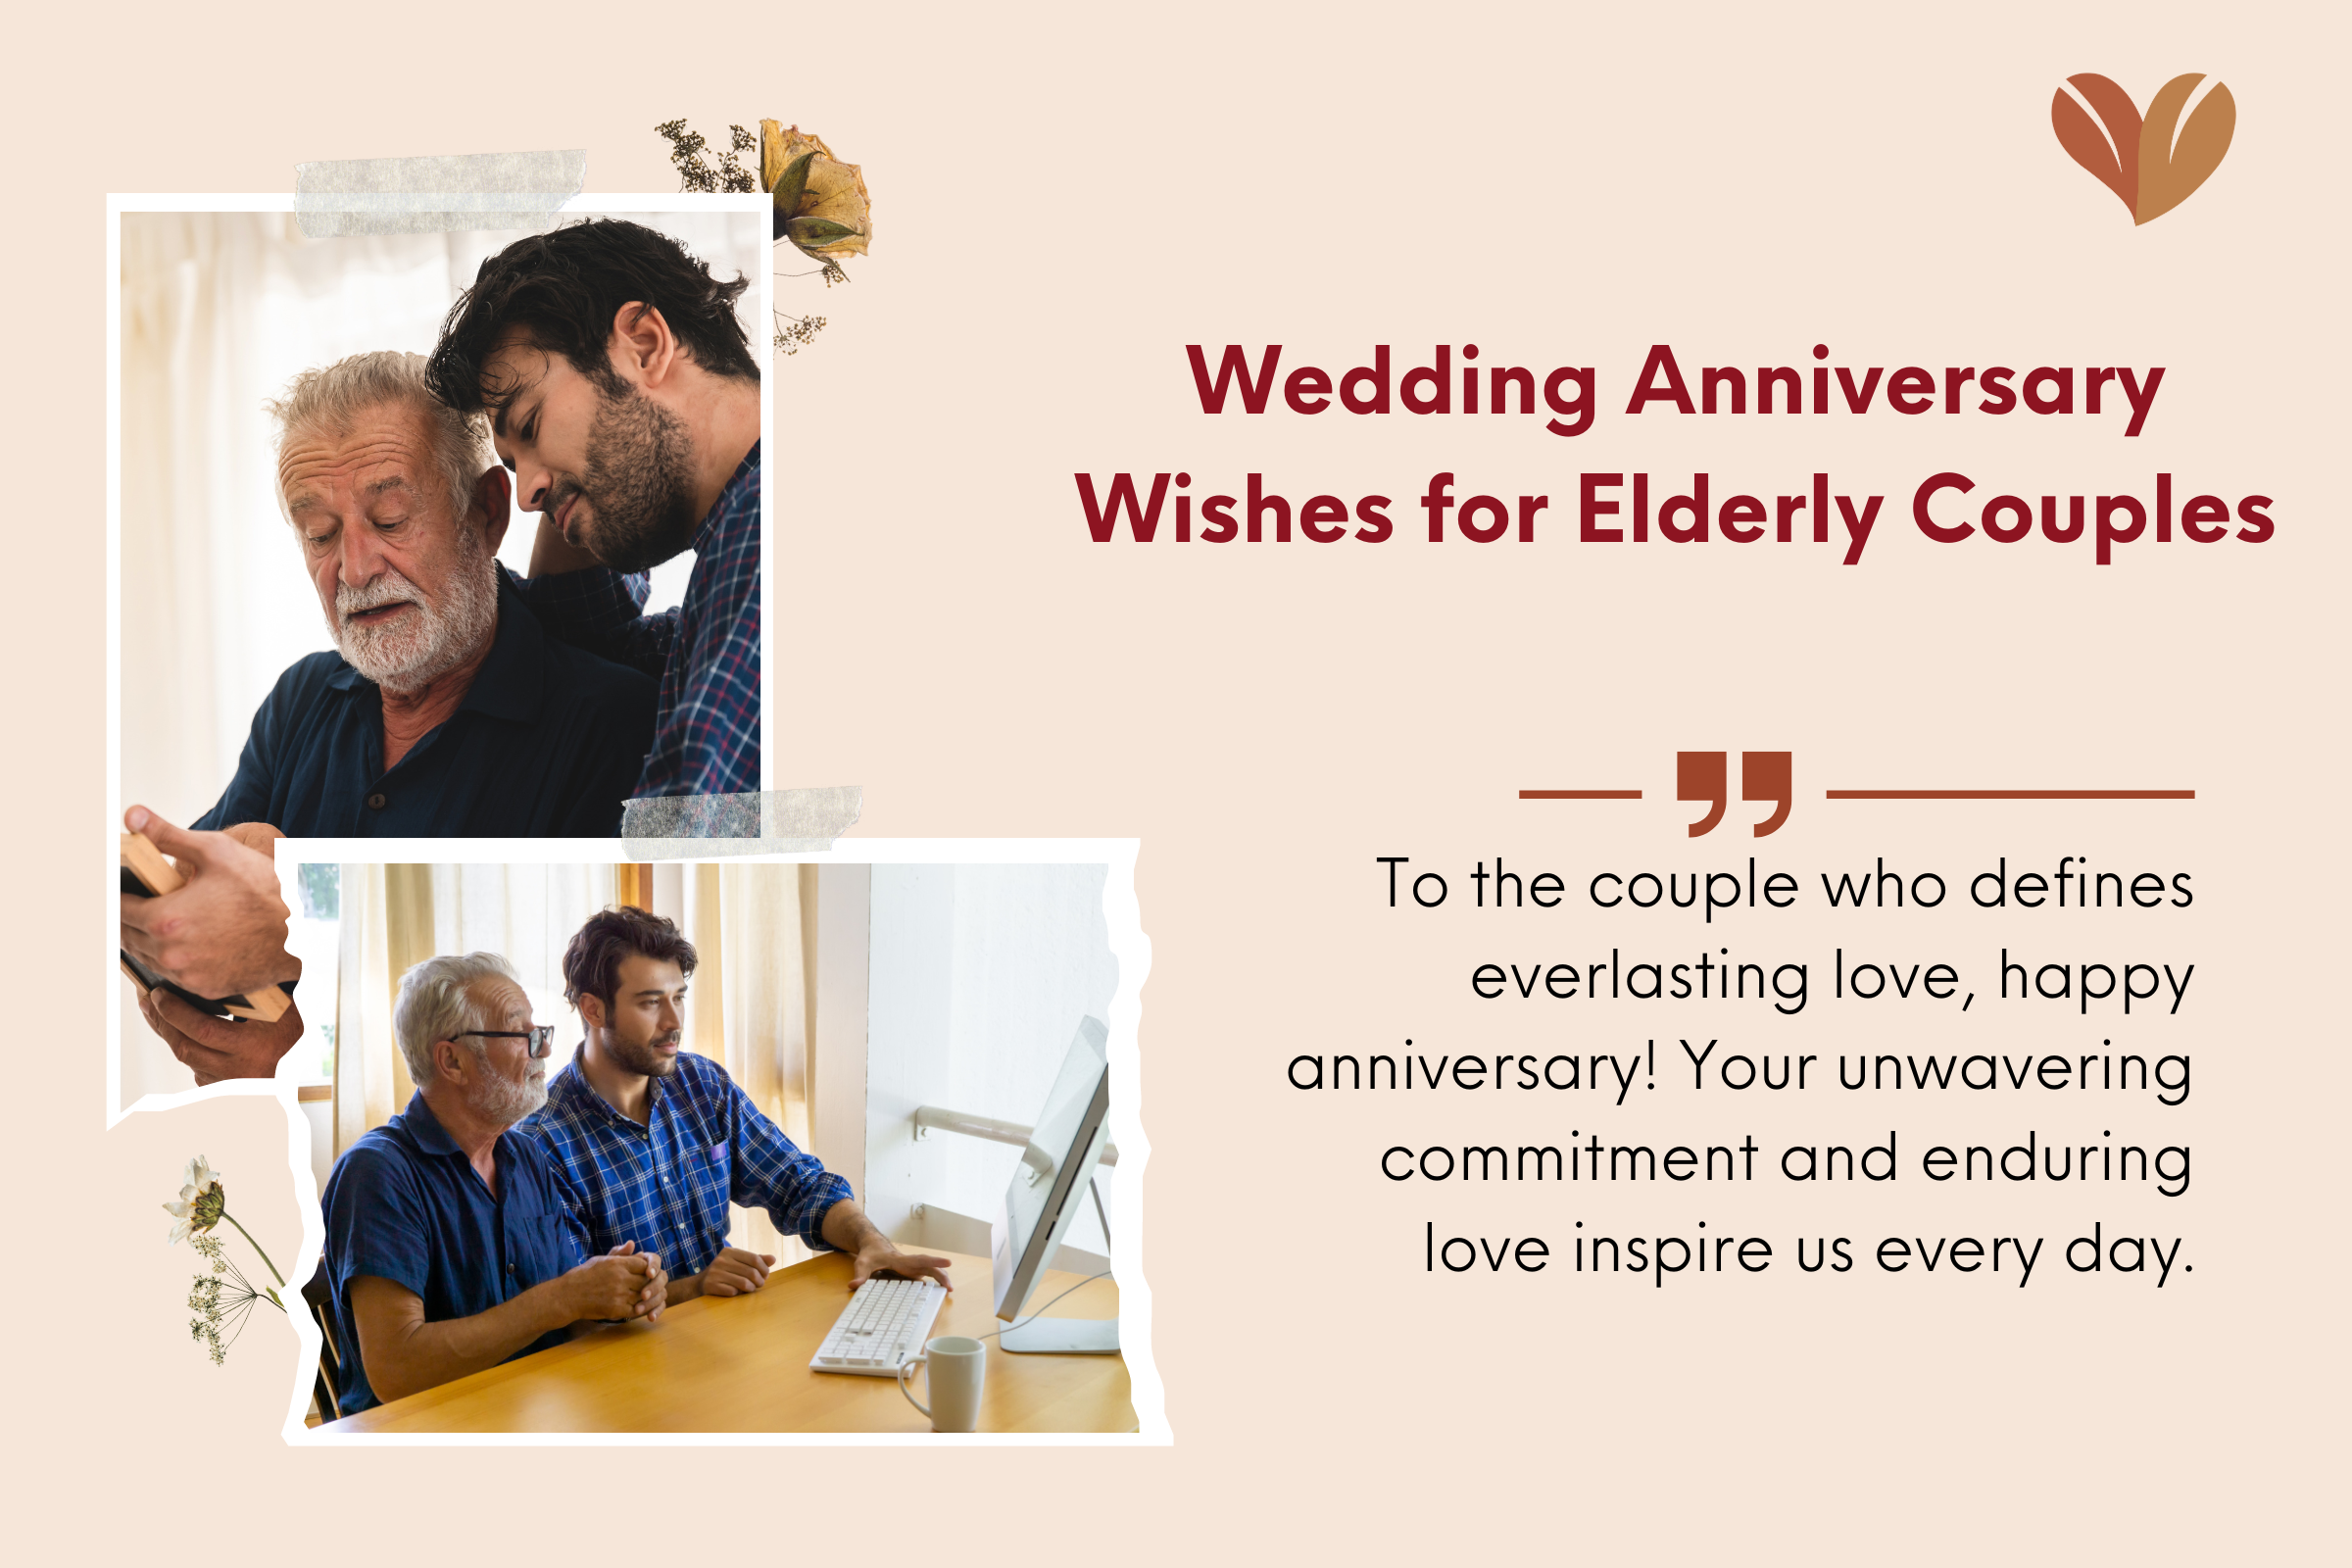 Say 'Happy Anniversary Parents!' by sending them cute wishes